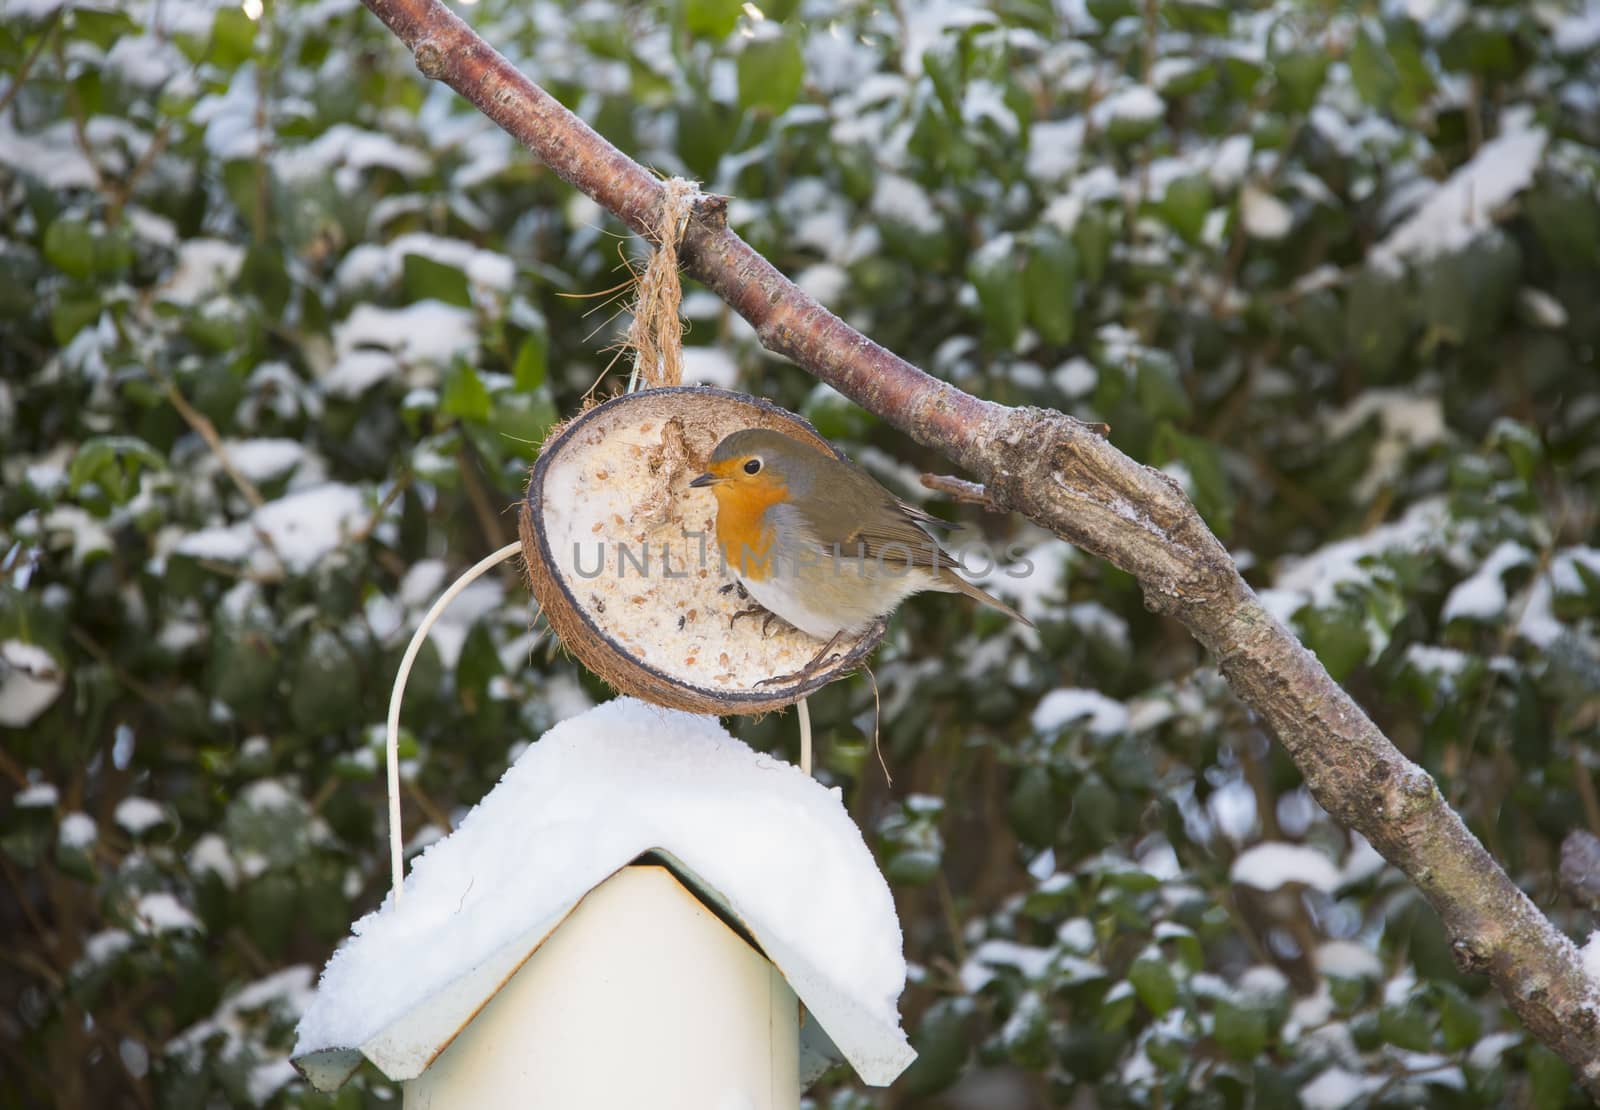 A Robin eating from a coconut in a garden tree